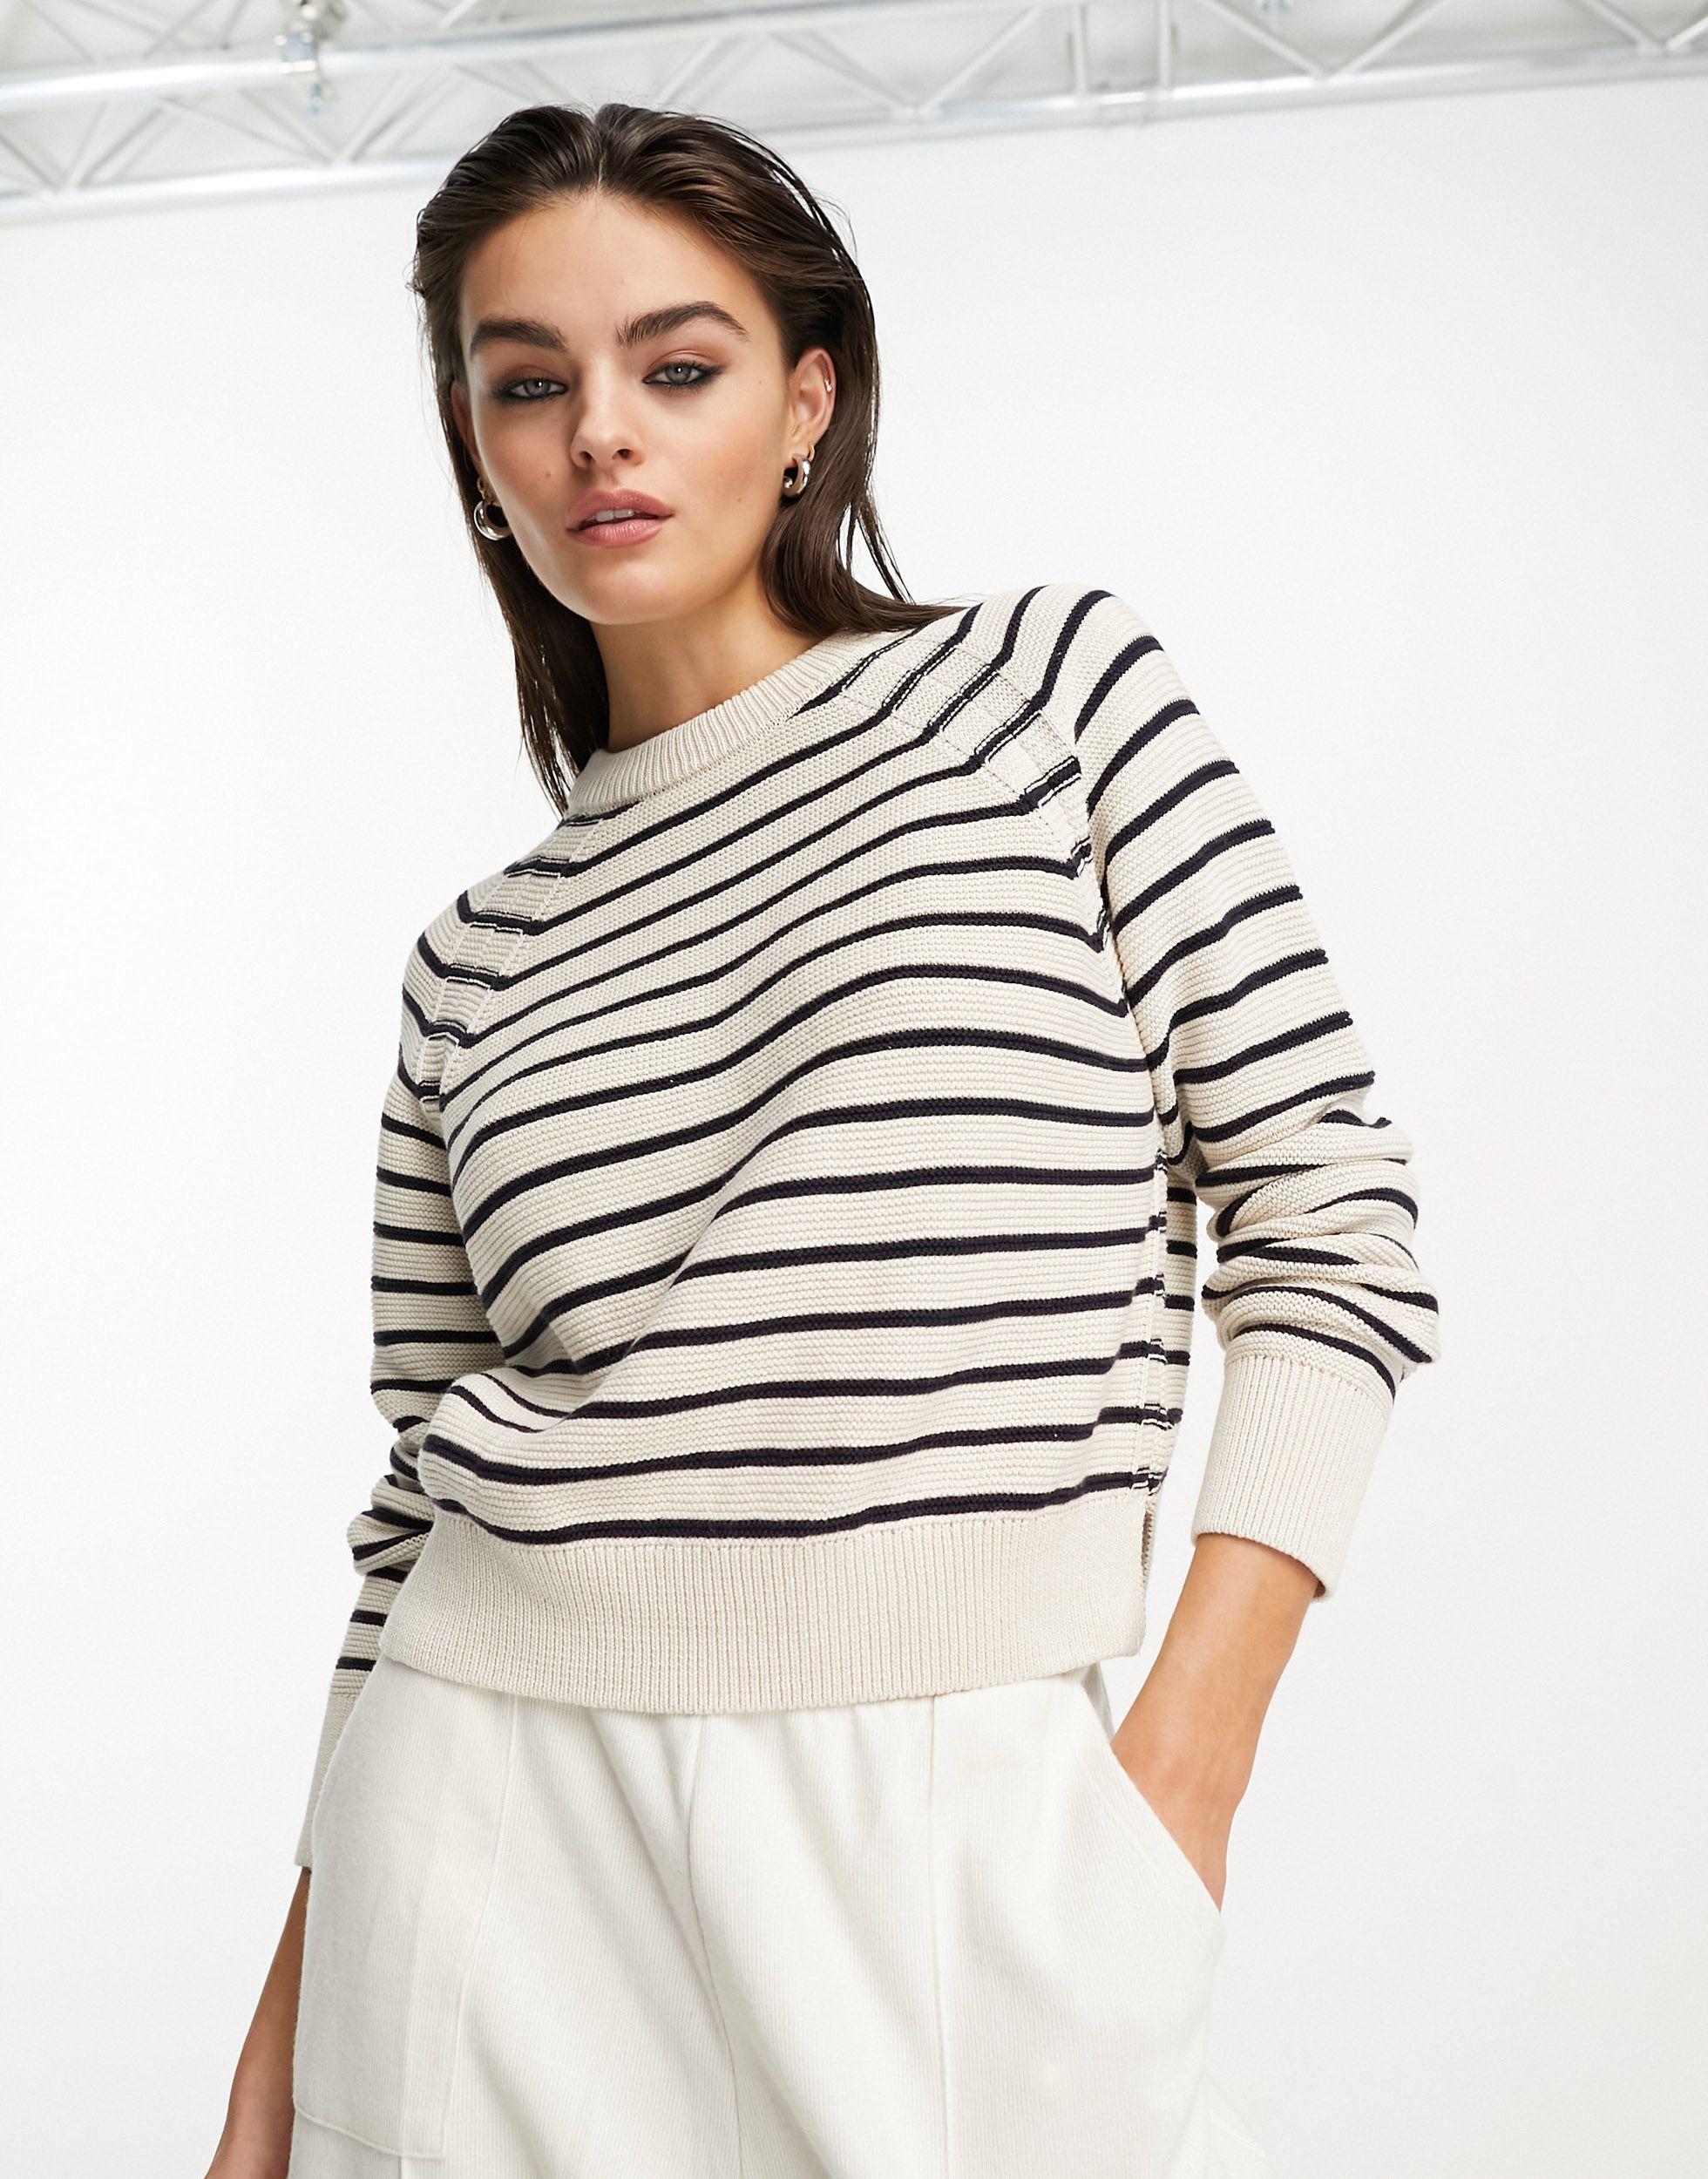 French Connection Mozart Striped Jumper in White